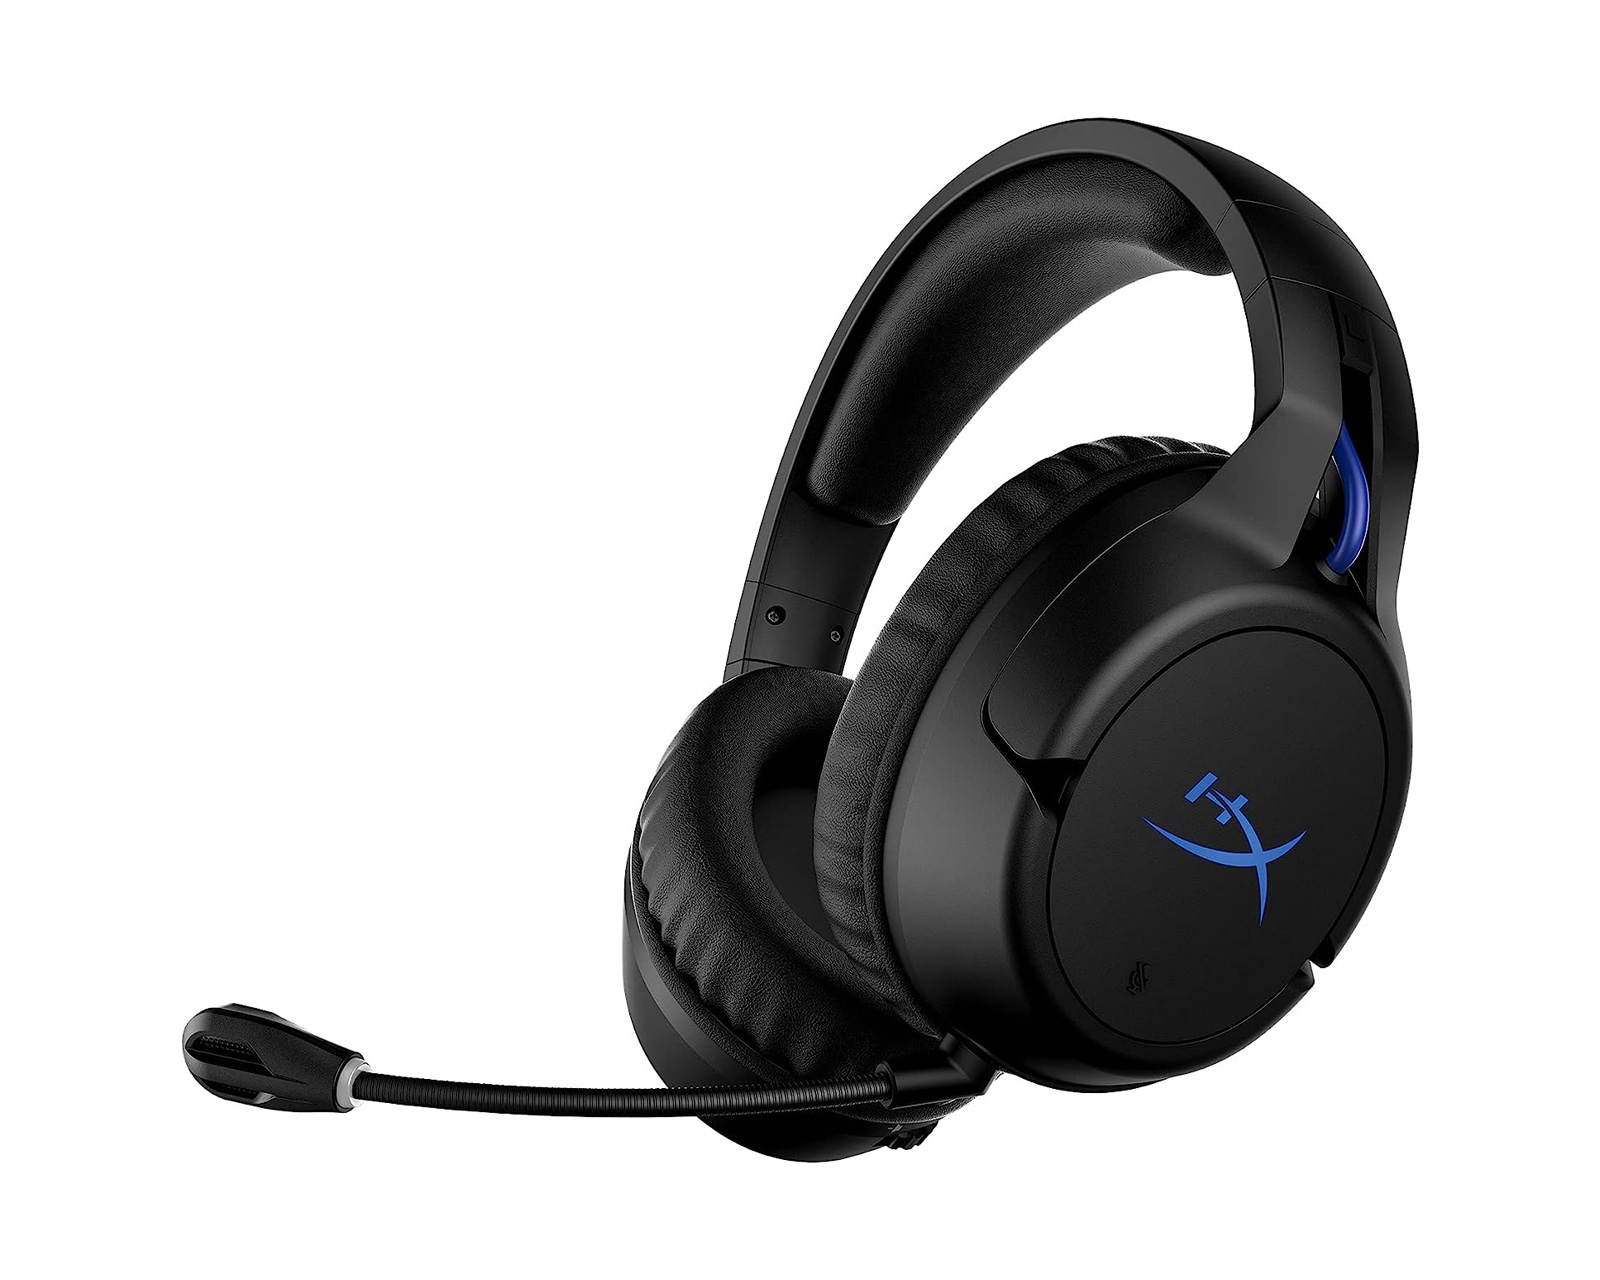 Wireless Gaming Headset, 2.4GHz Wireless Headset for PC, PS4/PS5, Nintendo  Switch, LongBattery Up to 30h, 7.1 Surround Sound, Detachable Microphone